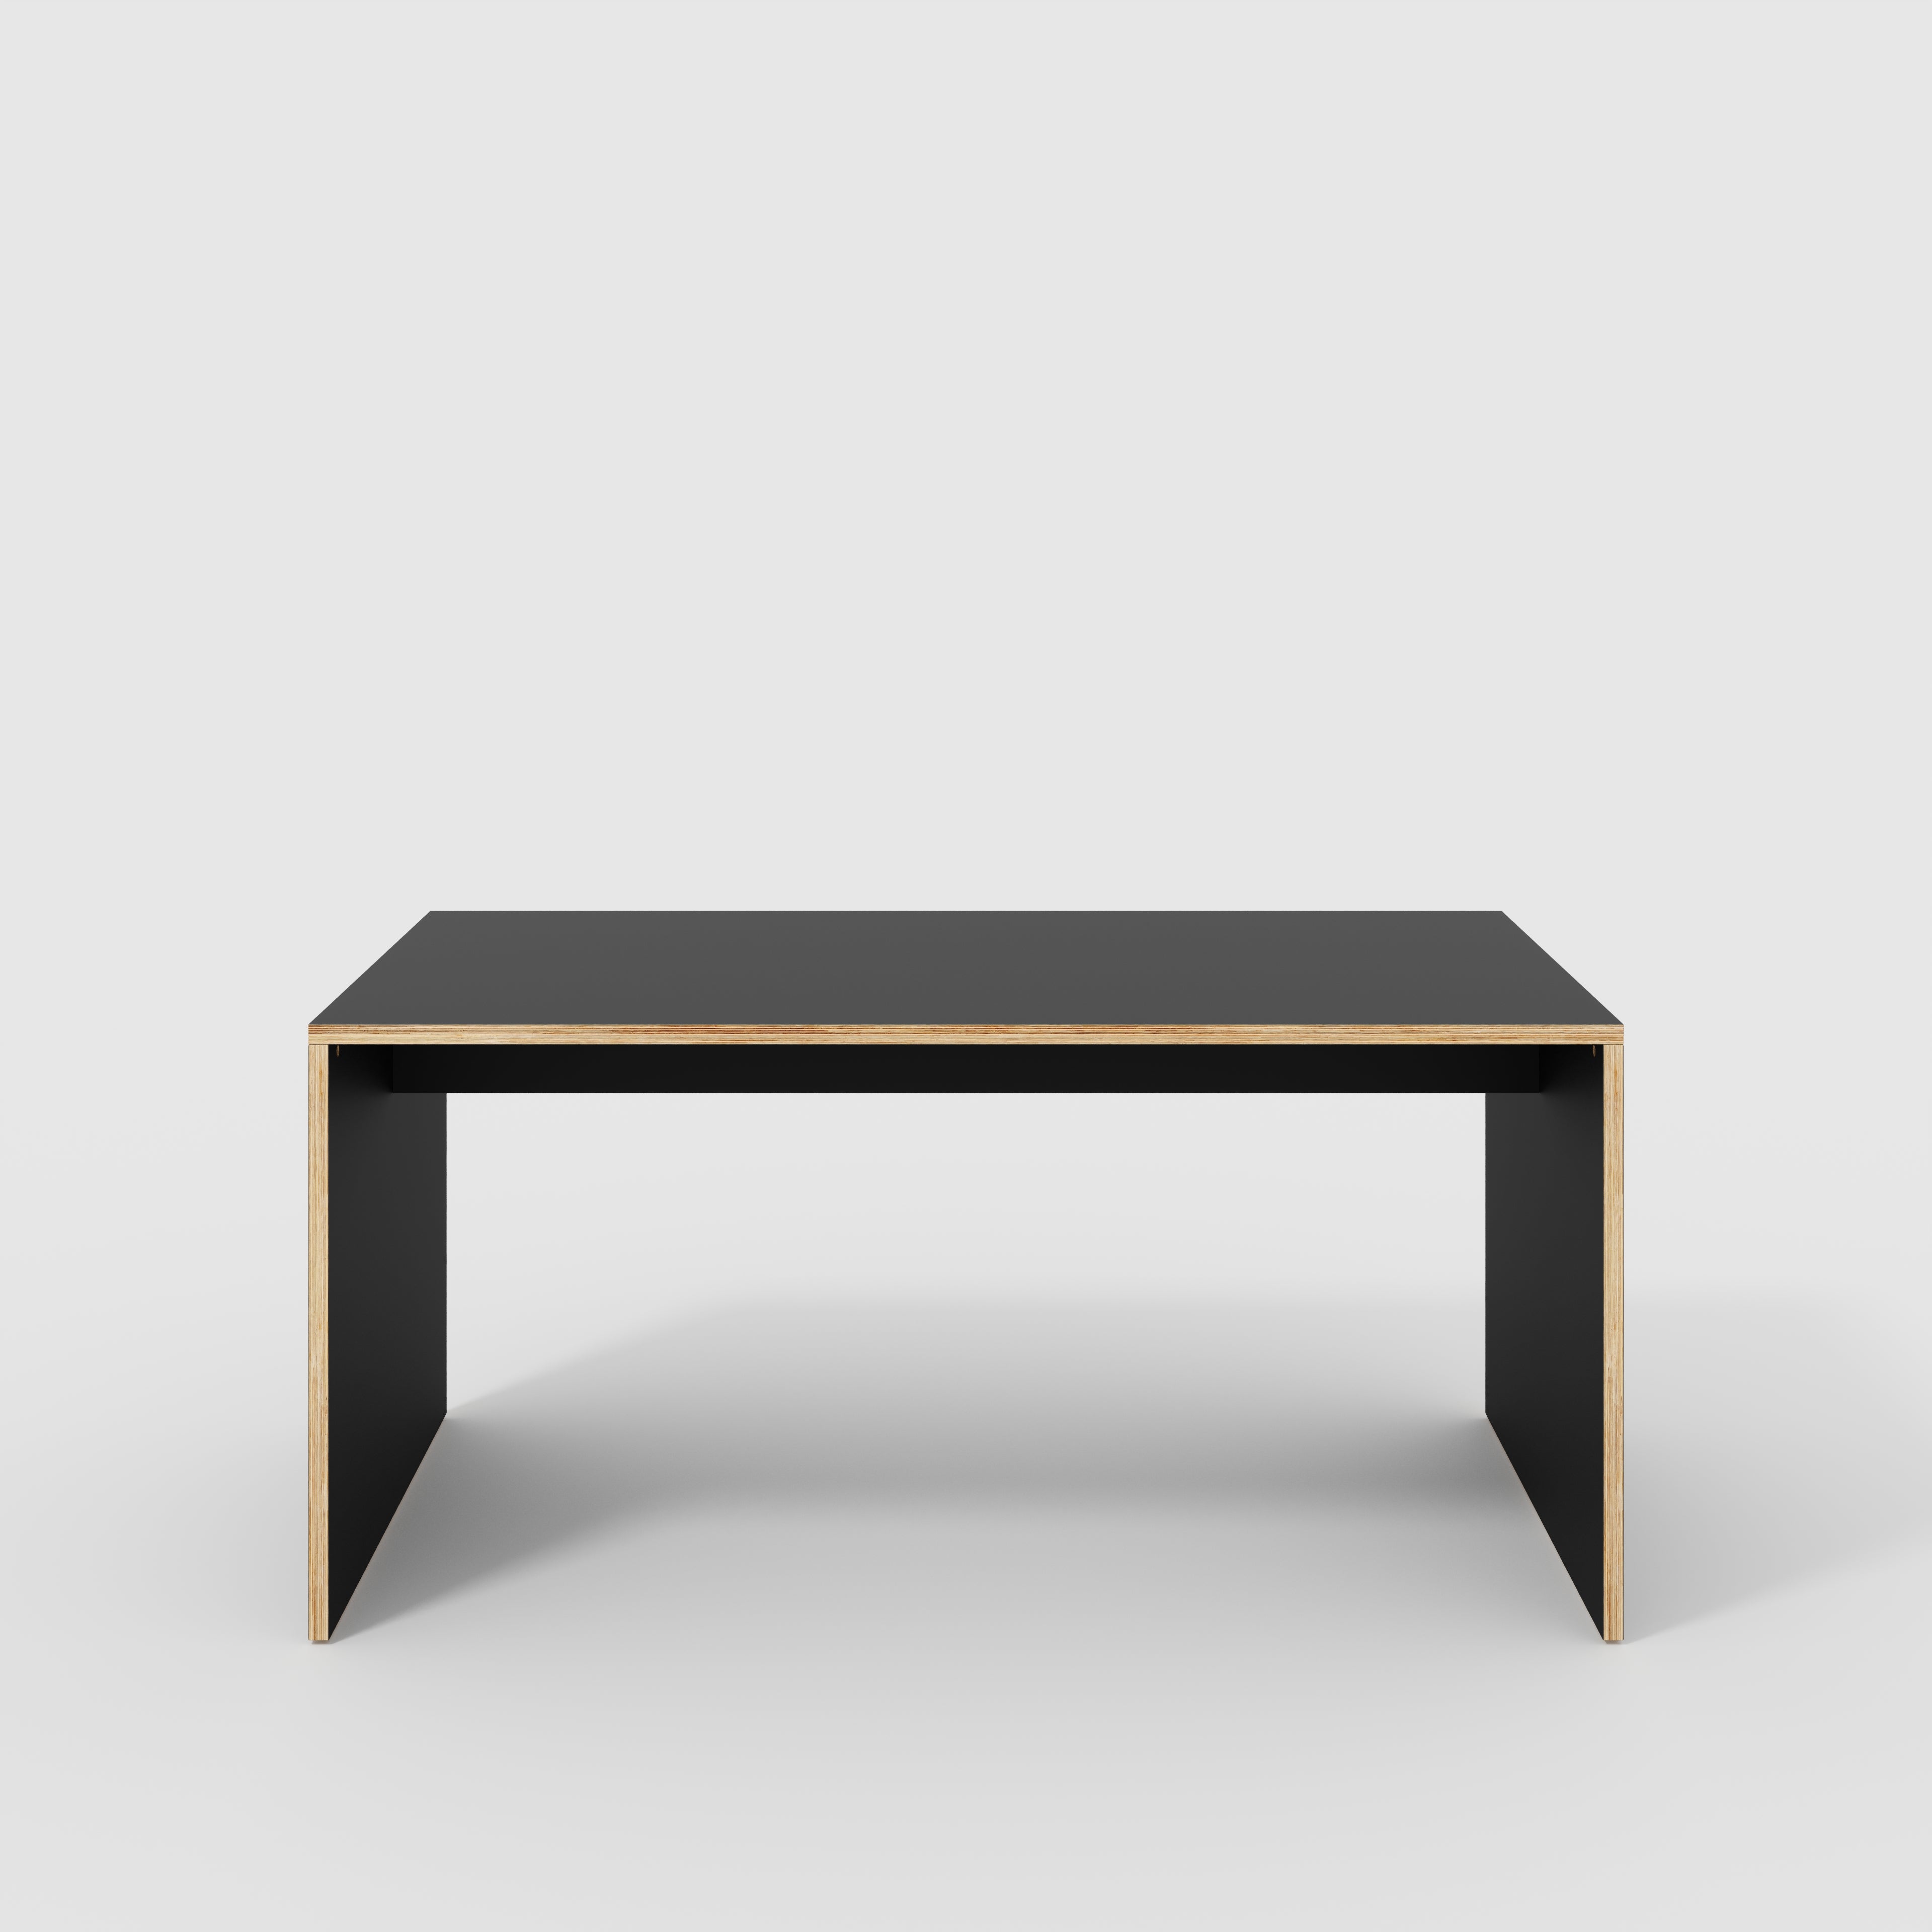 Table with Solid Sides - Formica Diamond Black - 1600(w) x 800(d) x 750(h)